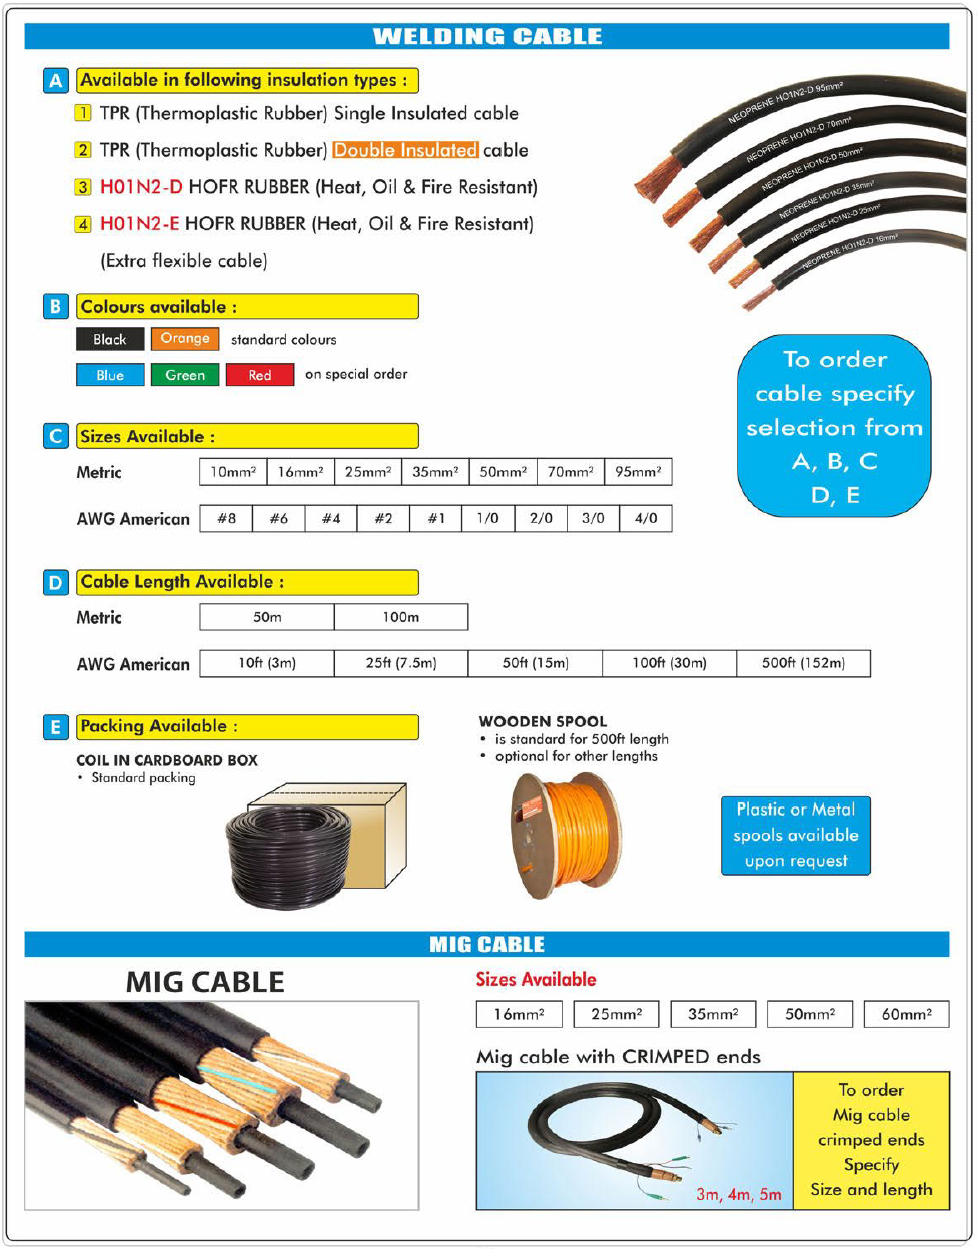 Welding Cable and Cable Kits